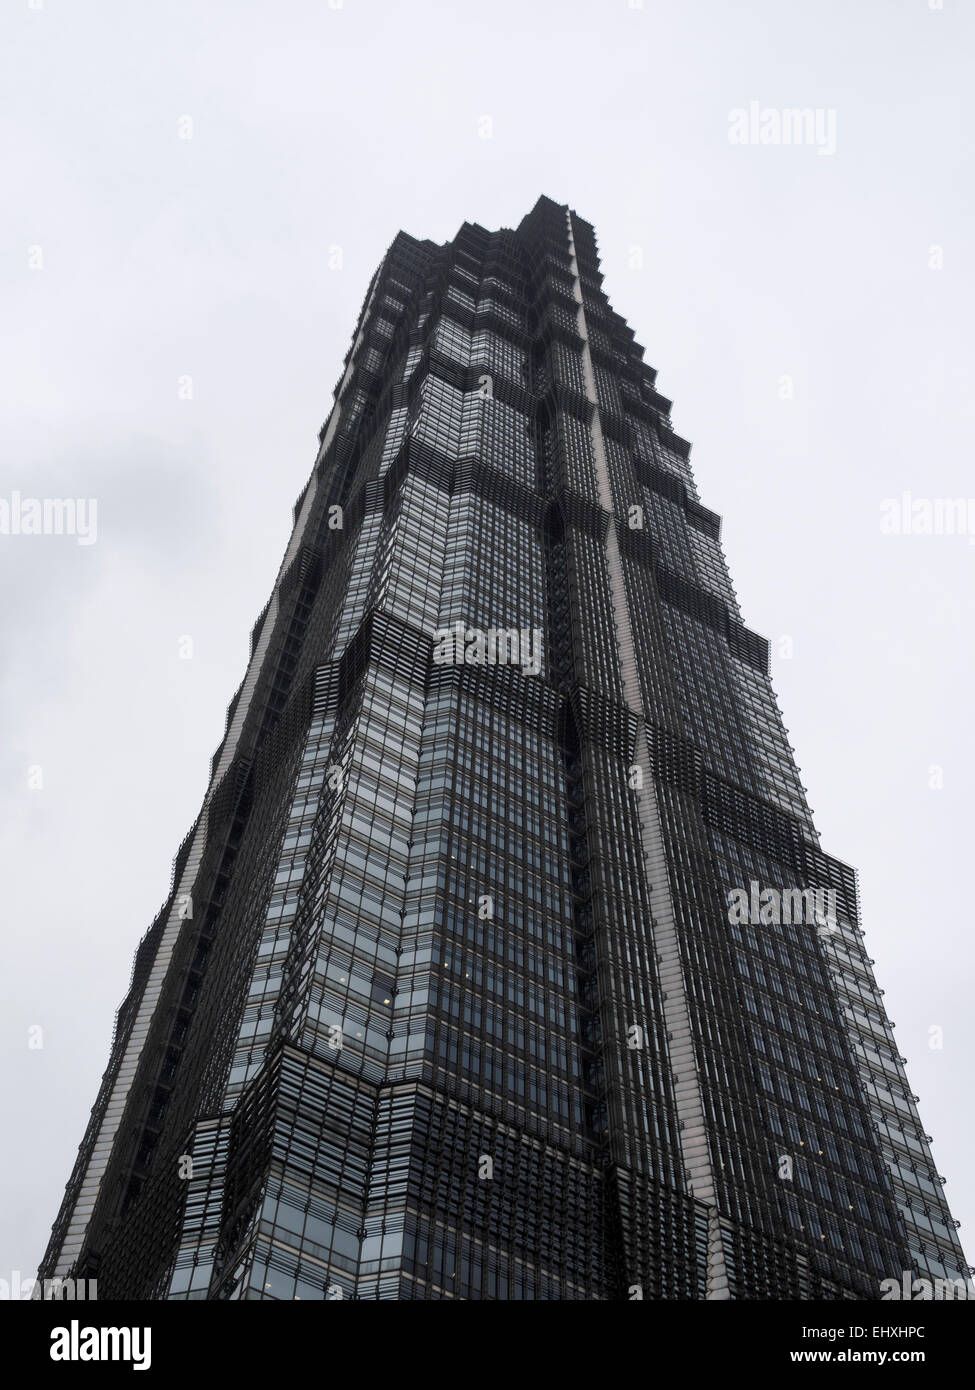 The Jin Mao Tower in the Lujiazui area of the Pudong district of Shanghai, China Stock Photo